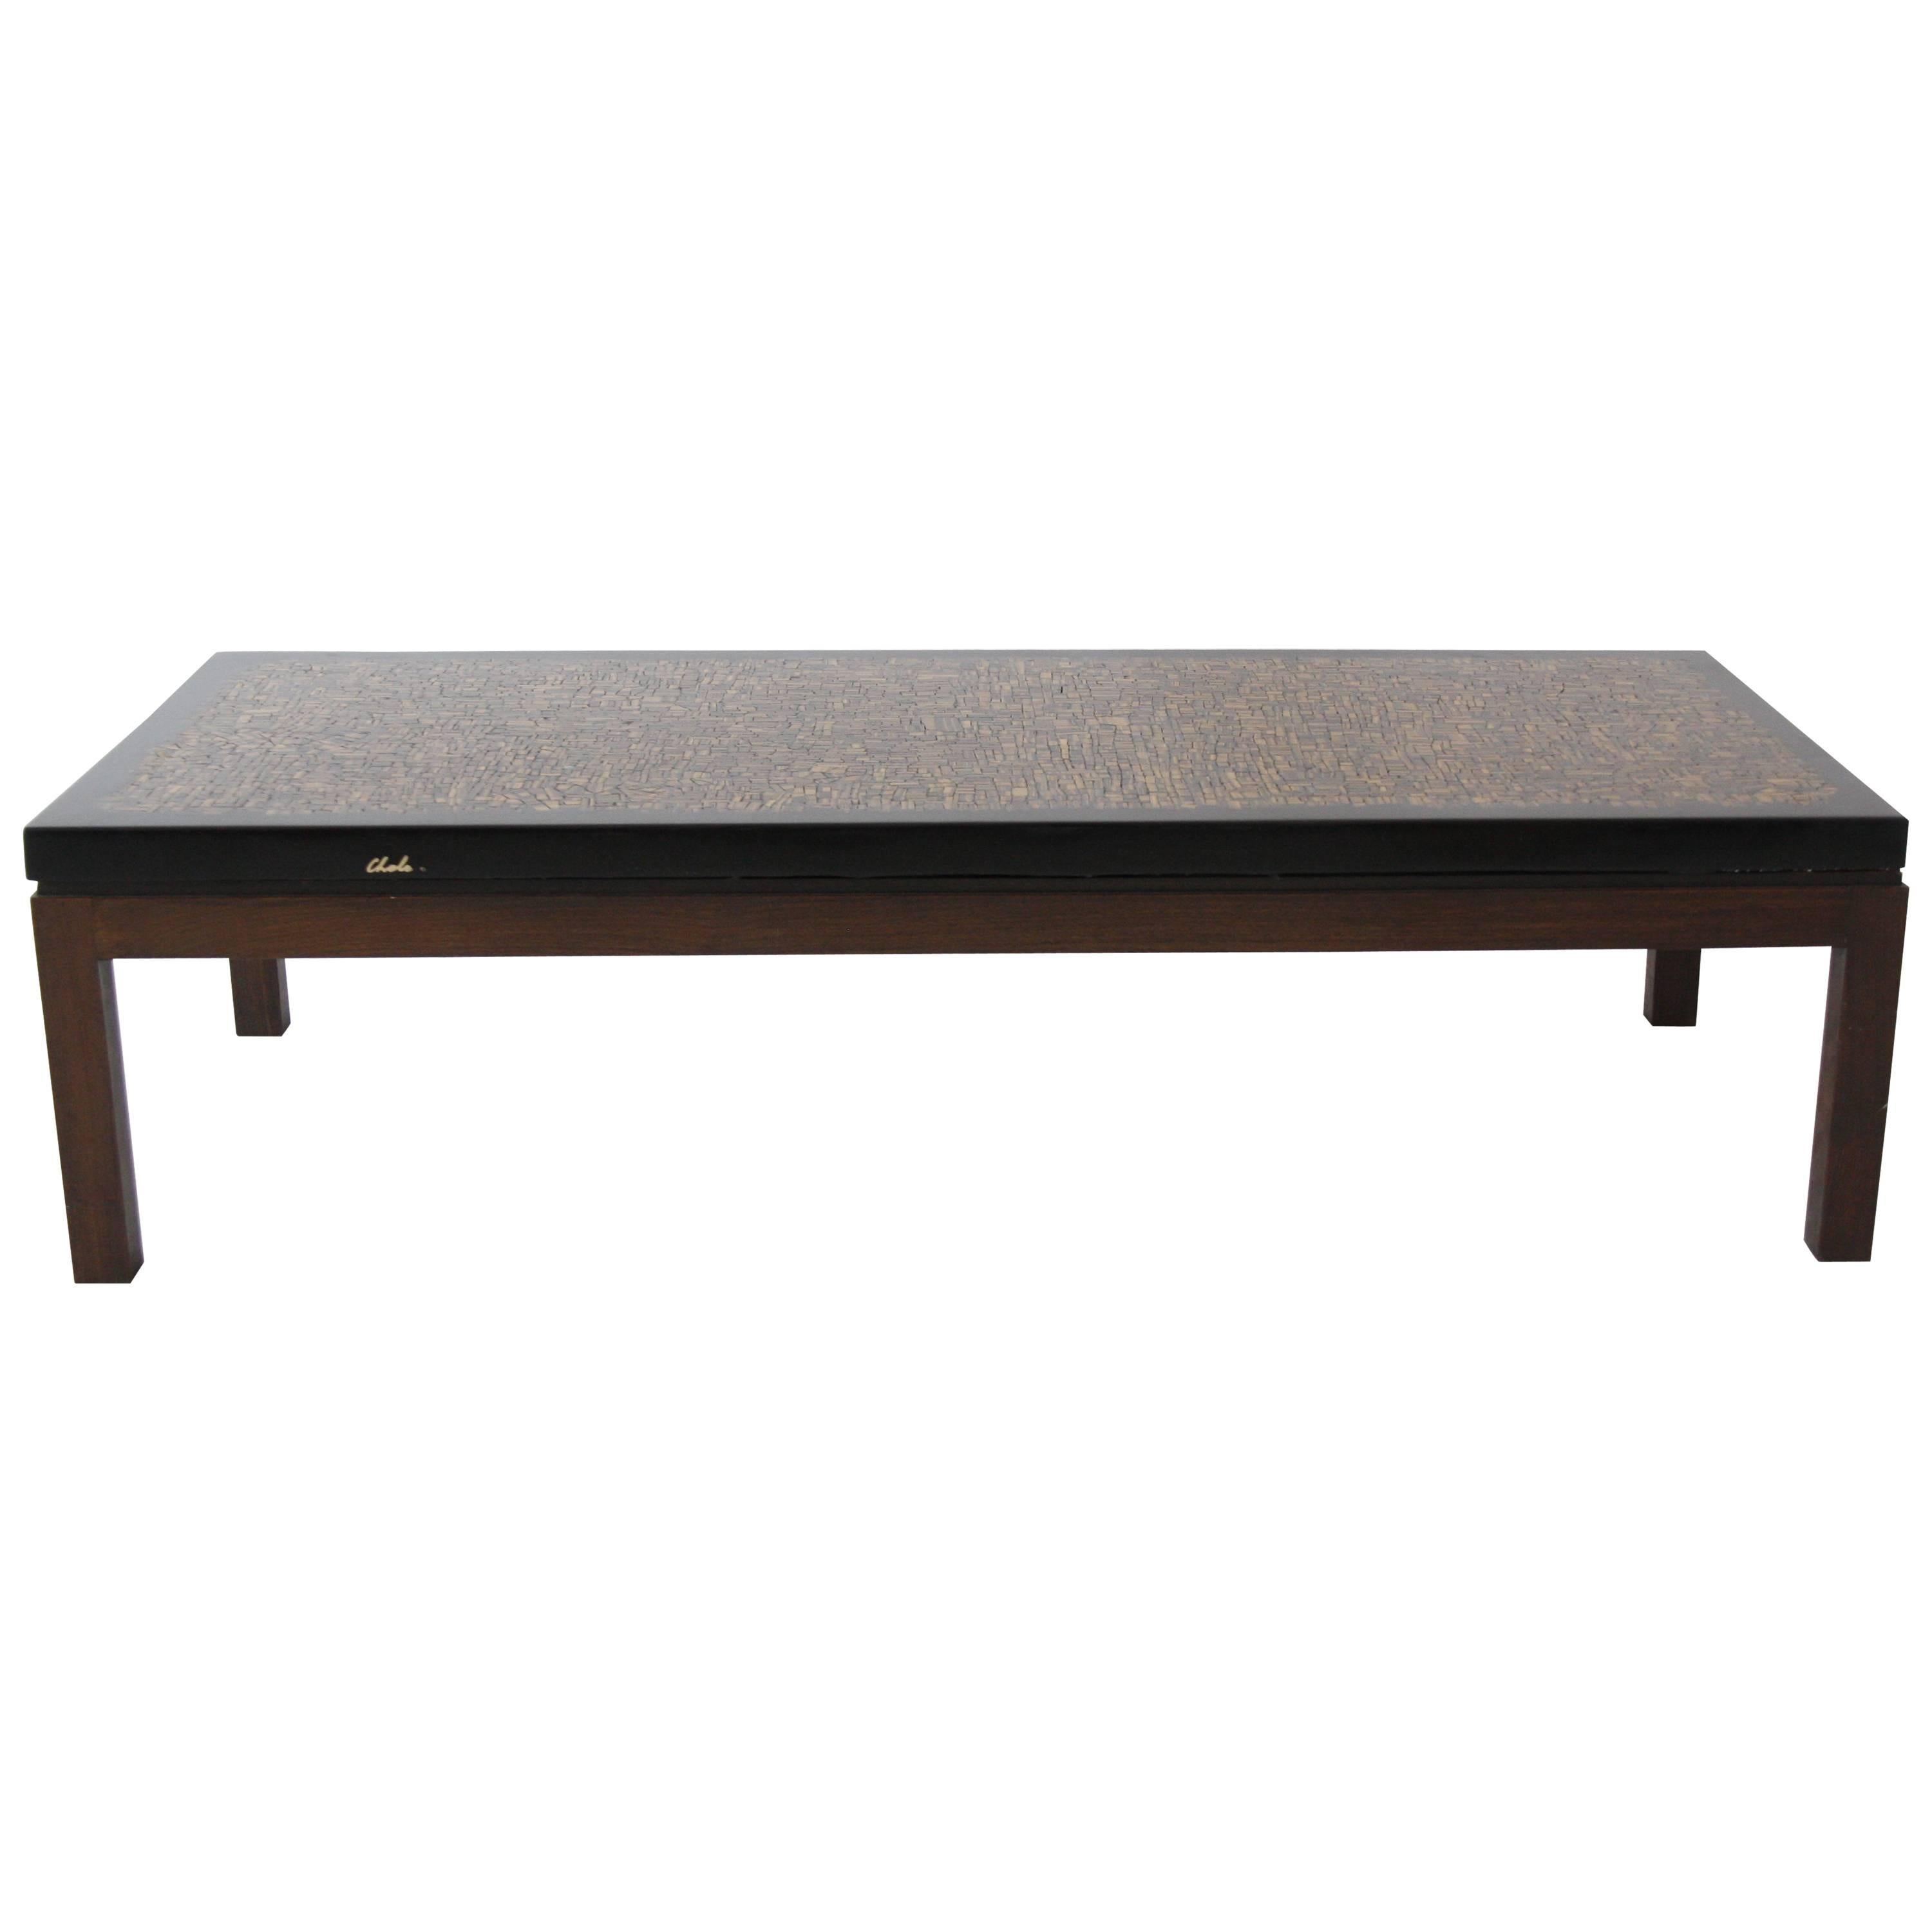 Belgian Vintage Coffee Table in Resine and Oeil de Tigre Inclusion by Ado Chale For Sale